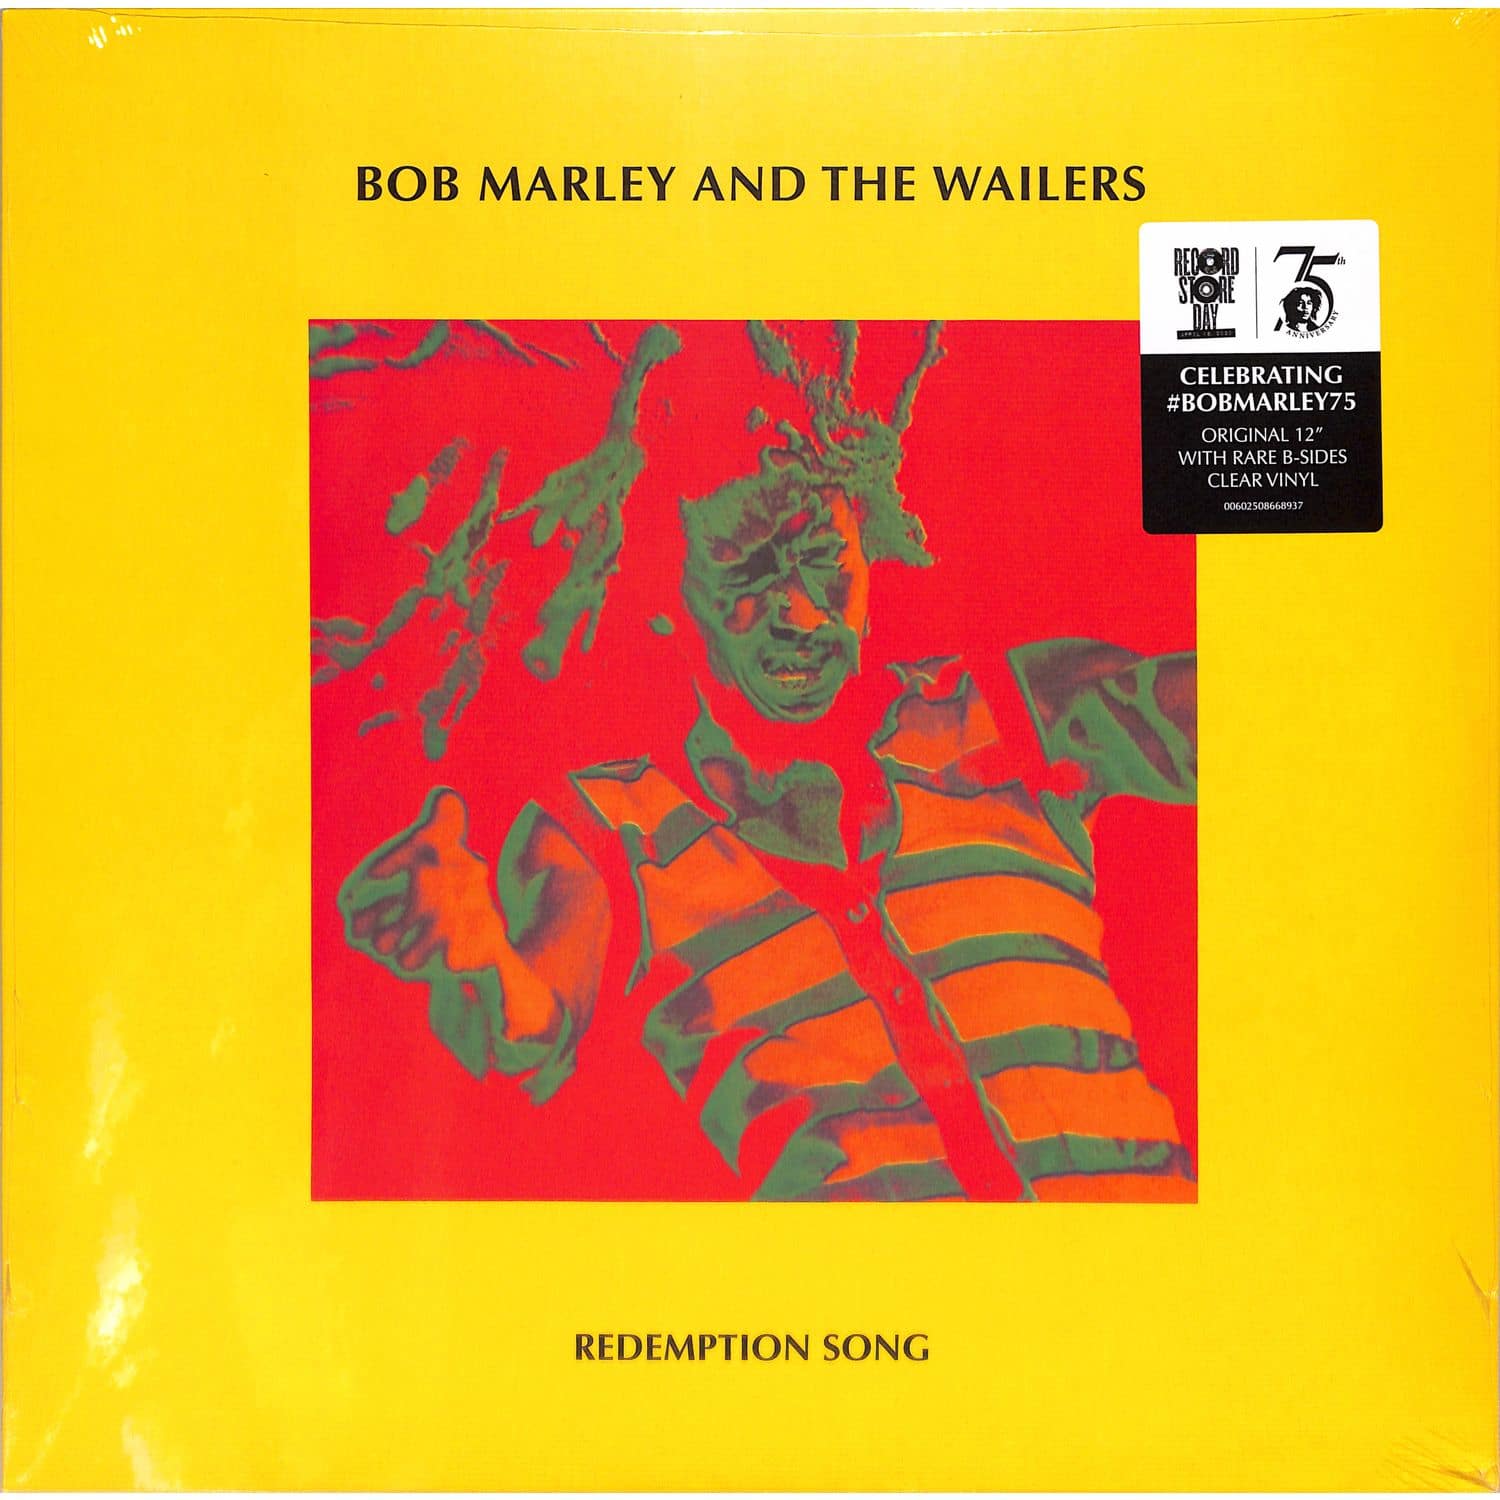 Bob Marley & The Wailers - REDEMPTION SONG 